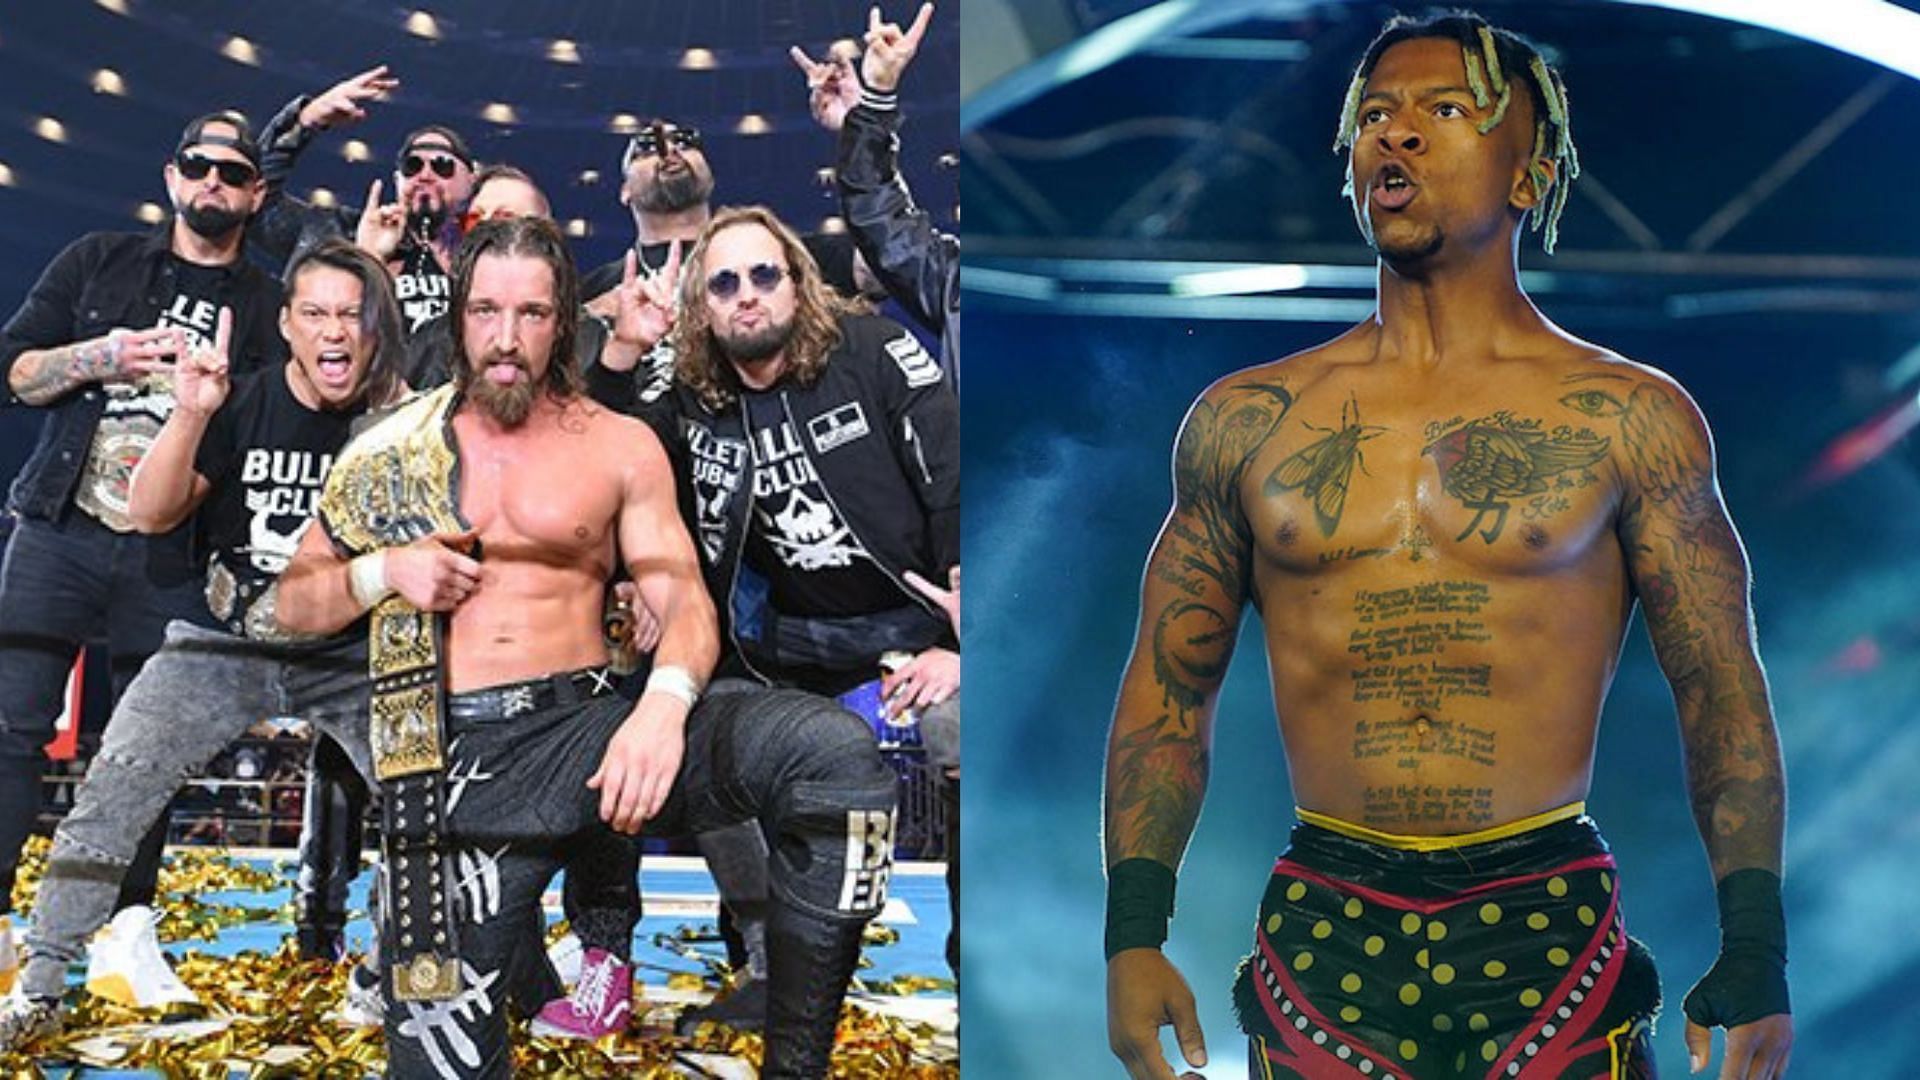 “I know who I want to face” - Popular Bullet Club member wants a rematch with former WWE star Lio Rush after historic Wrestle Kingdom 17